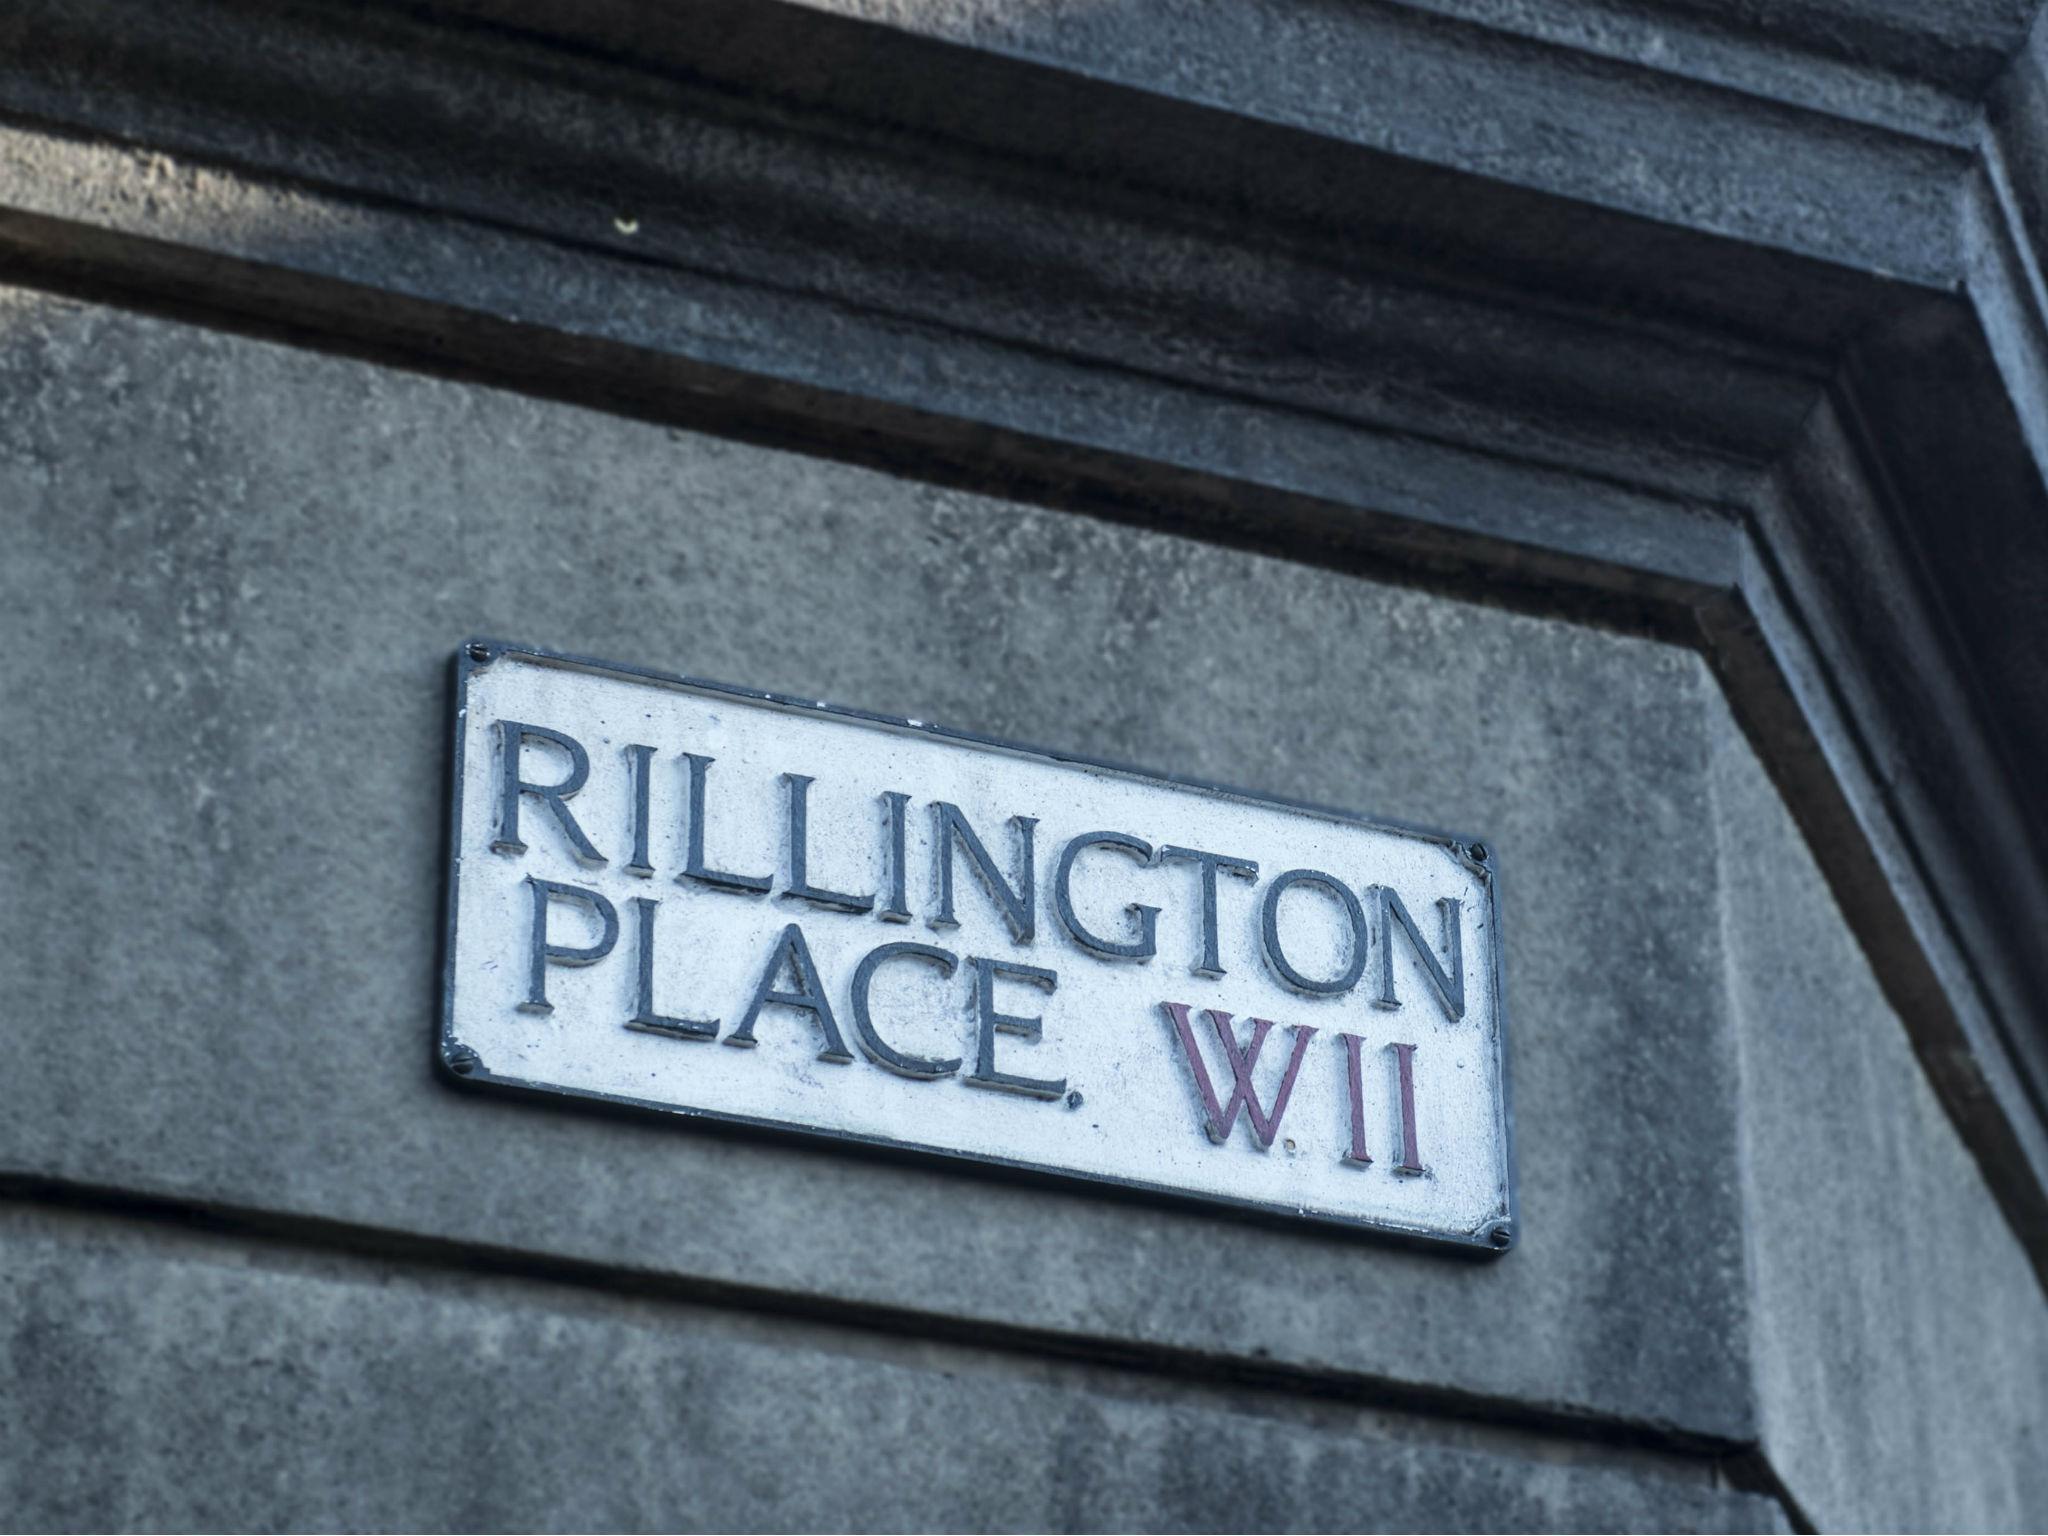 John Christie was a serial killer who lived at number 10 Rillington Place in Notting Hill